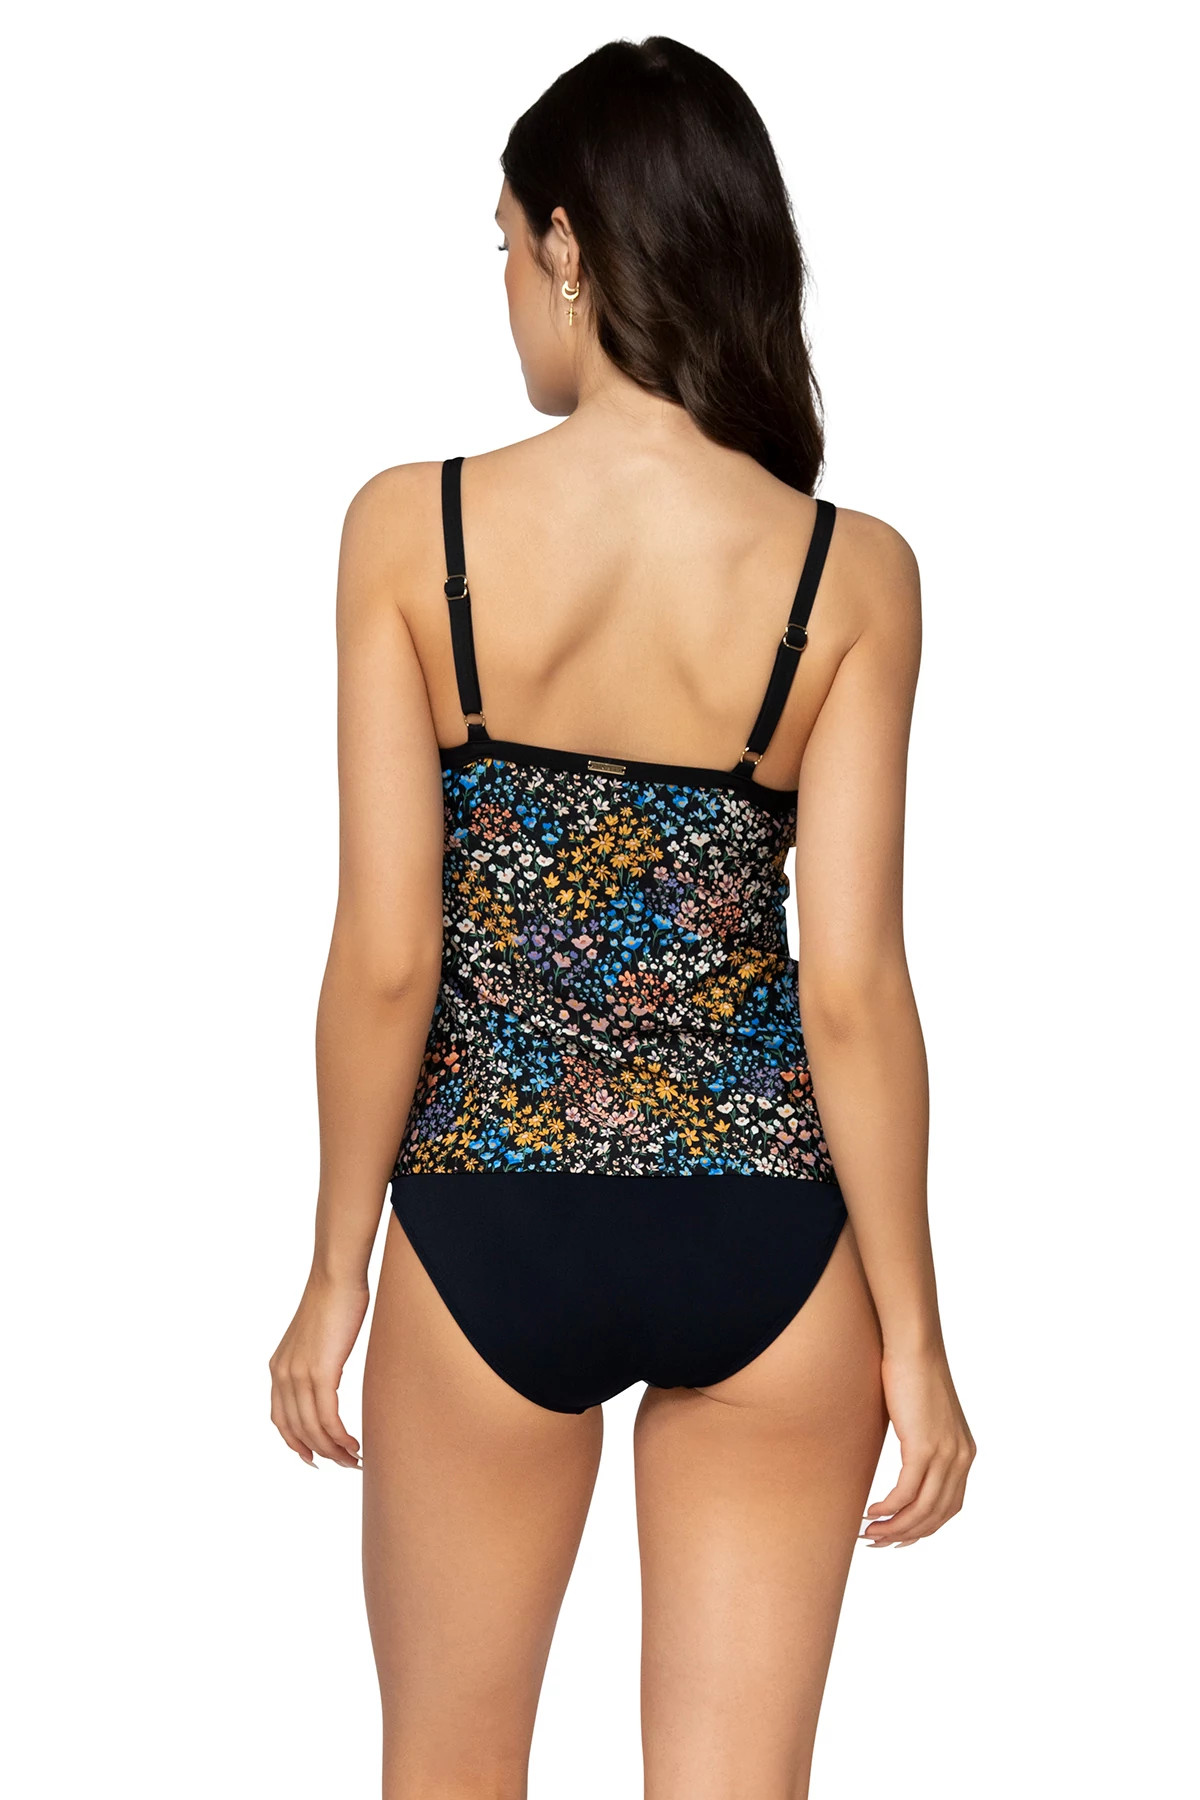 SUNBLOOM Forever Underwire Bra Tankini Top (D+ Cup) image number 2